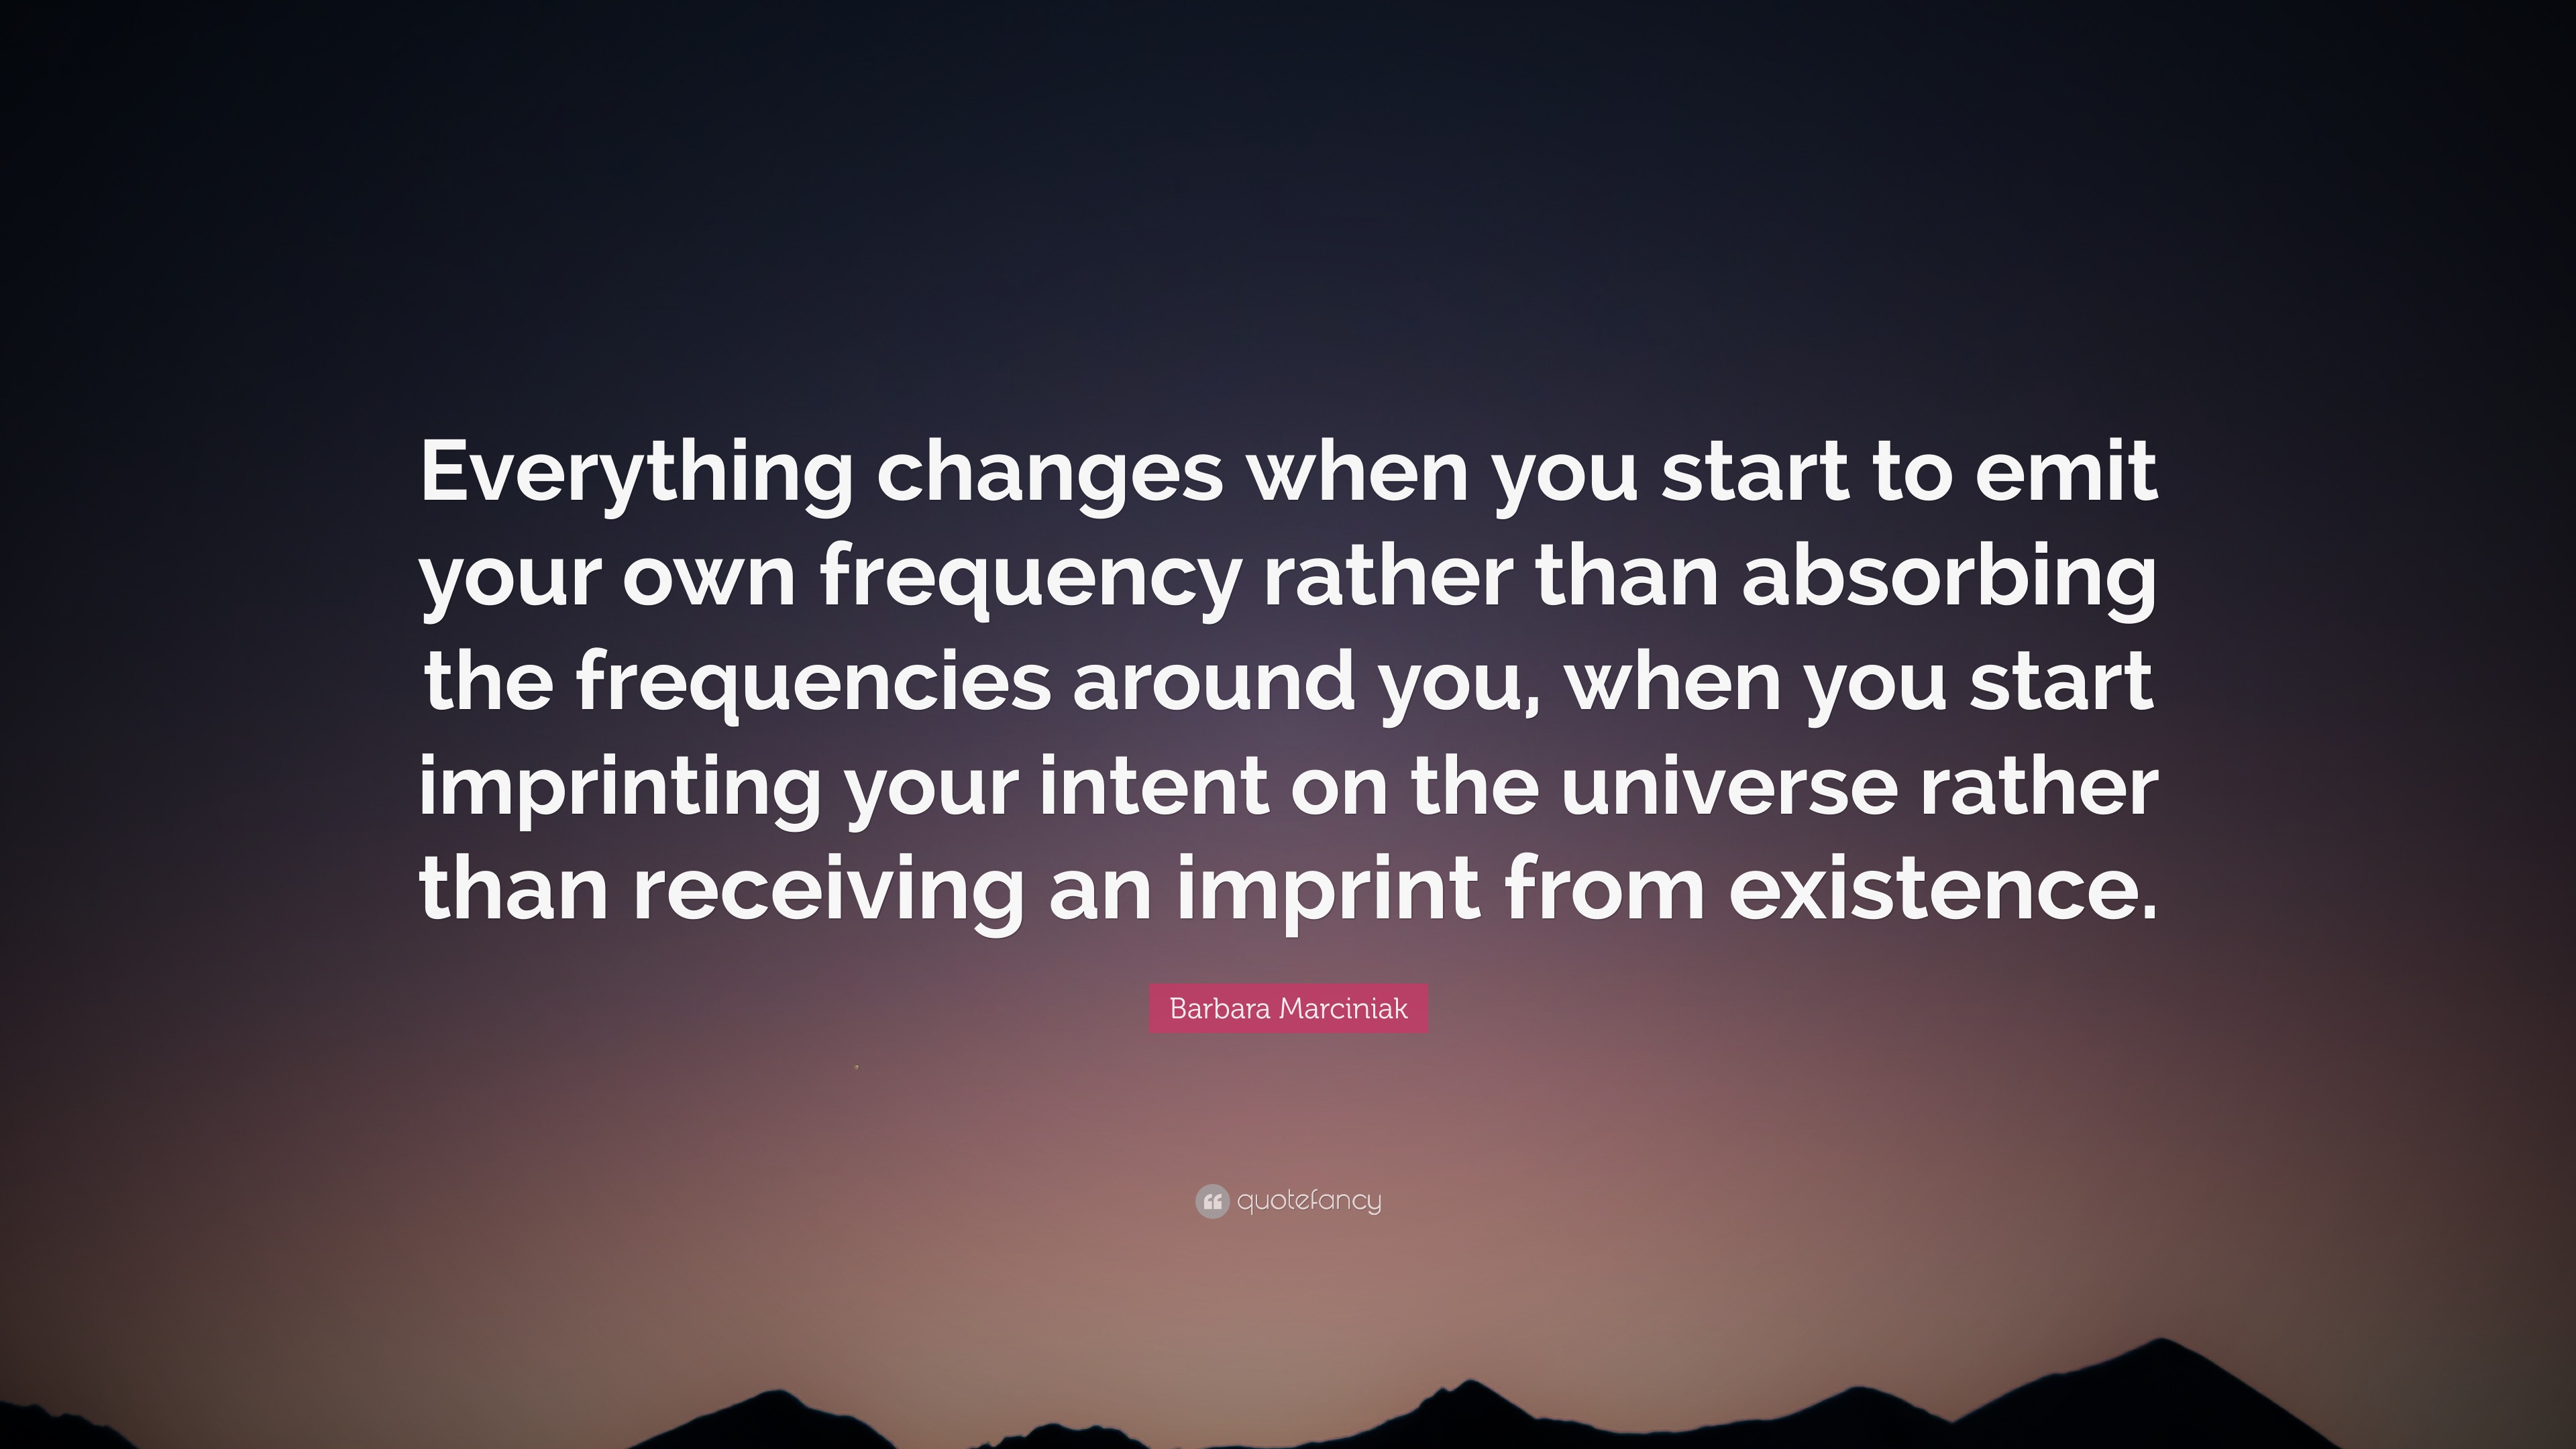 Barbara Marciniak Quote: “Everything changes when you start to emit